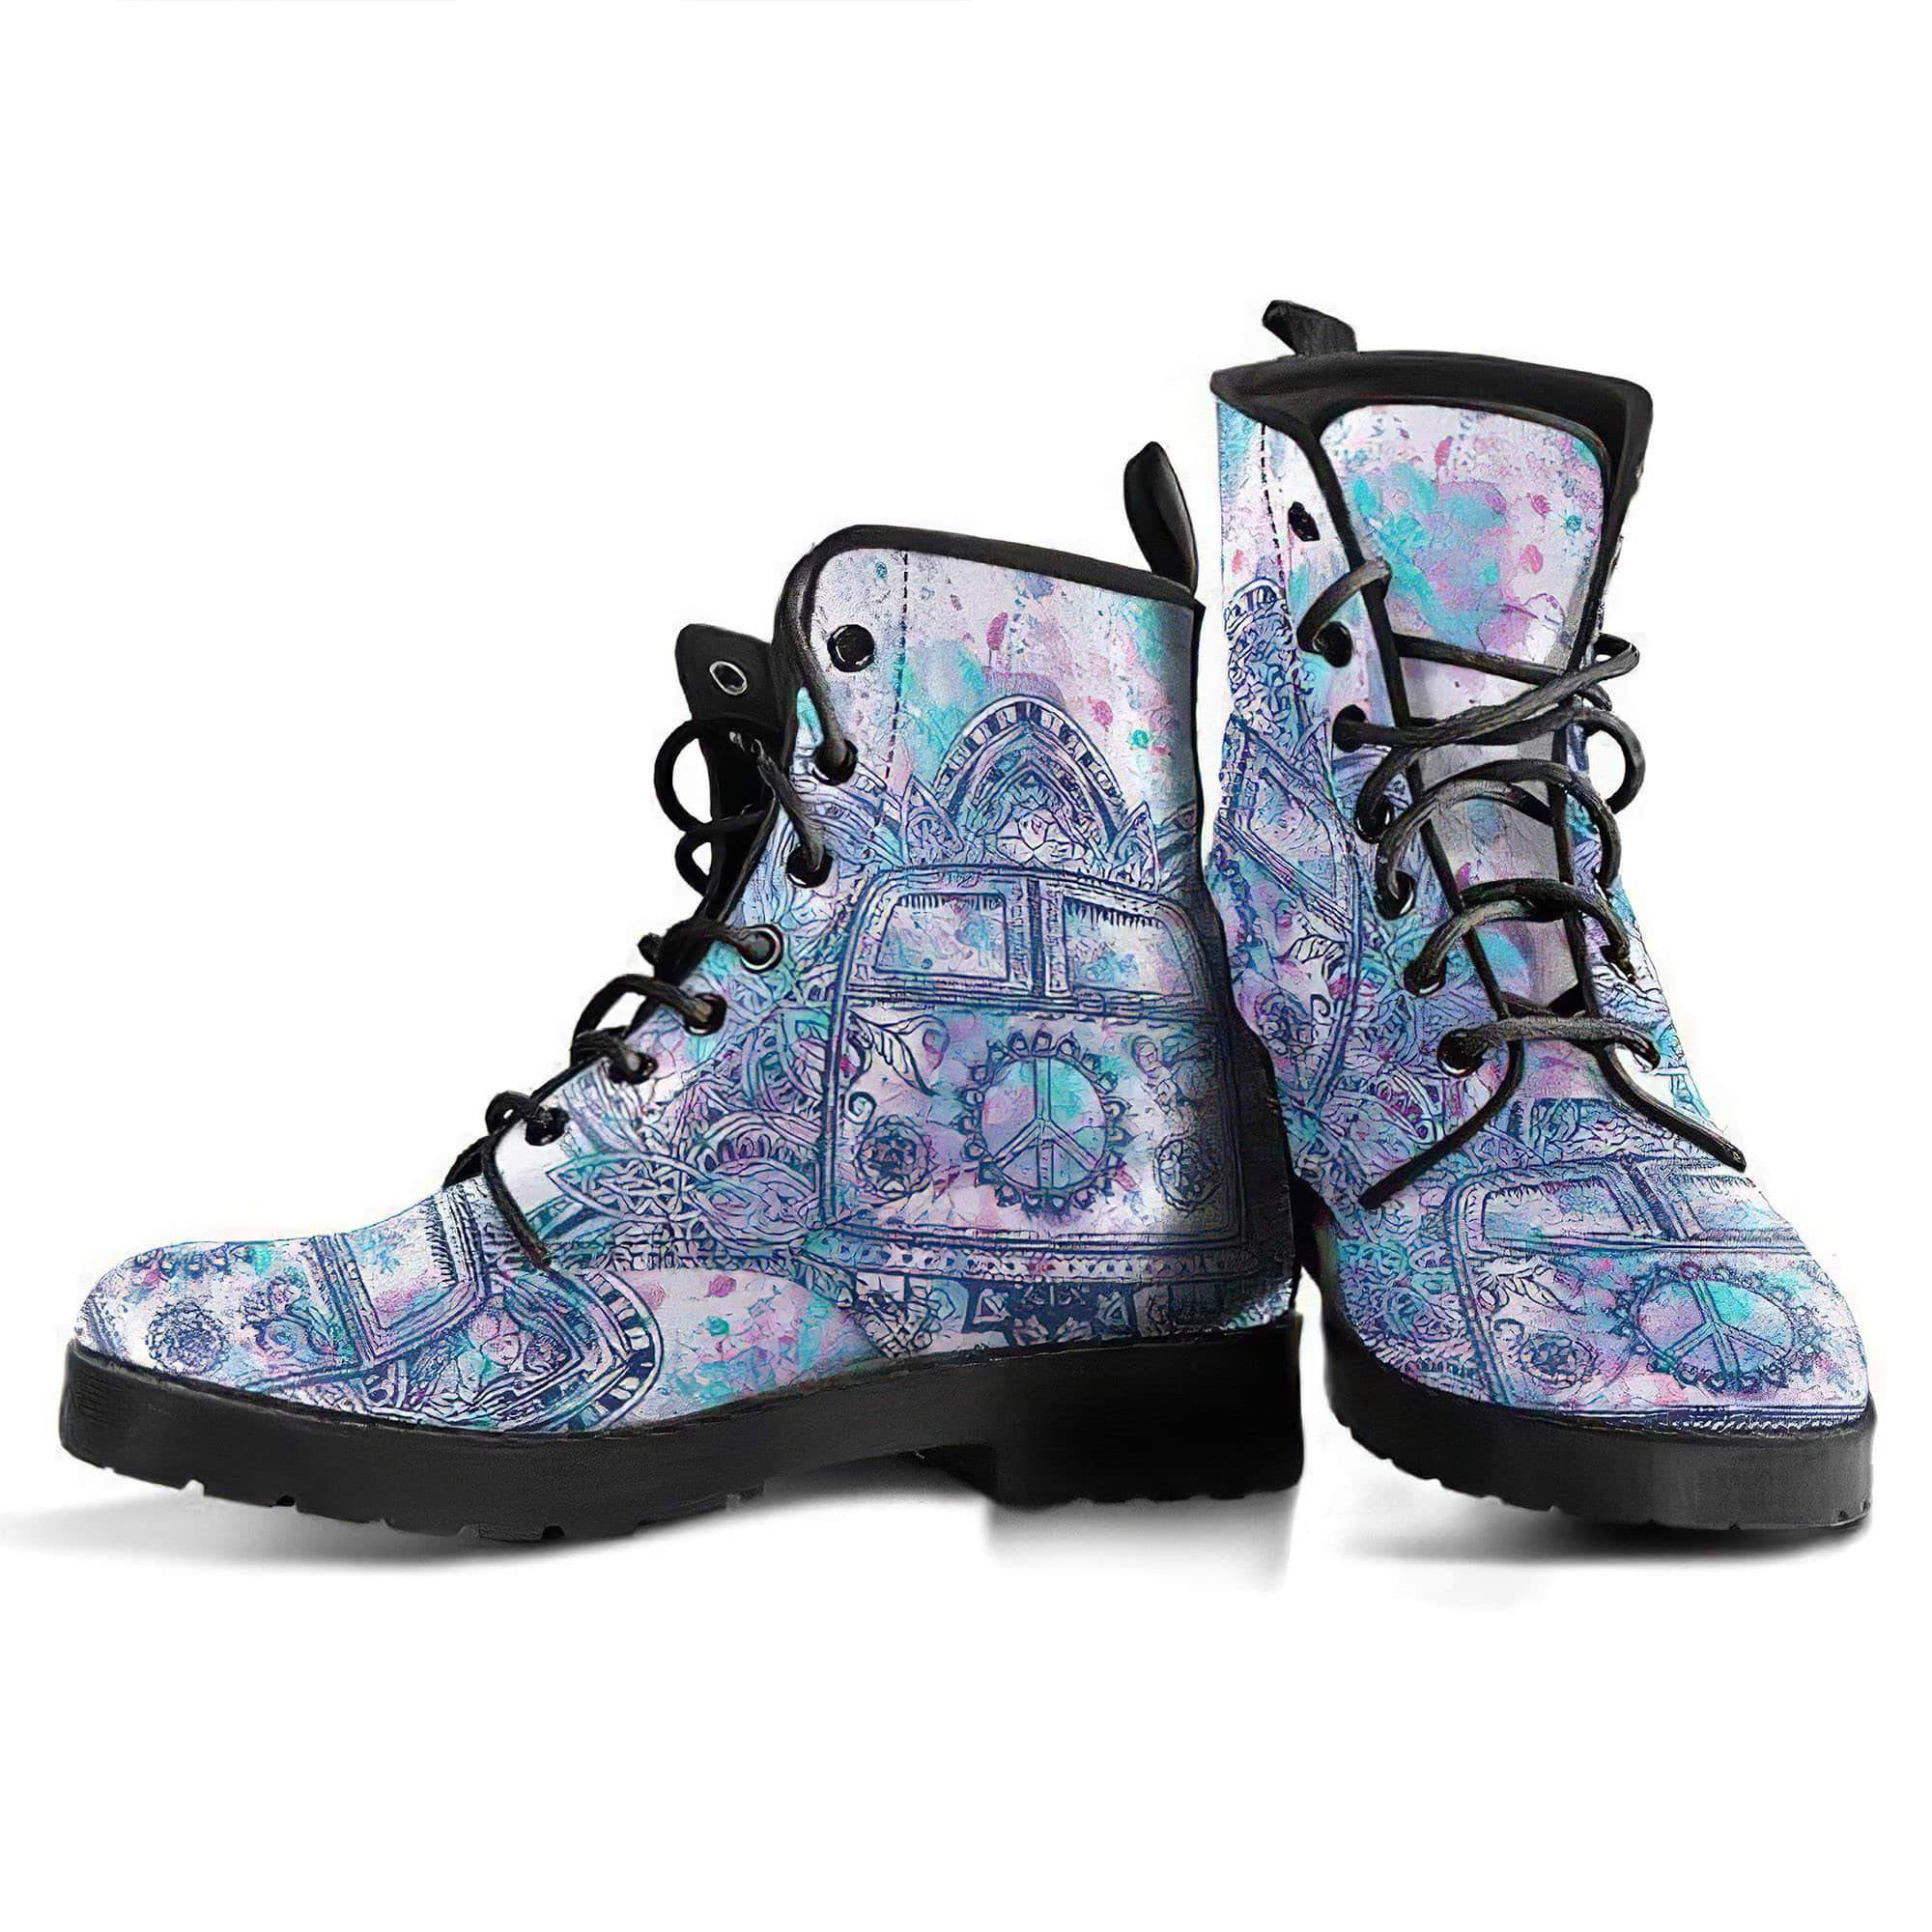 purpe-hippie-bus-and-mandala-handcrafted-boots-women-s-leather-boots-12051932577853.jpg